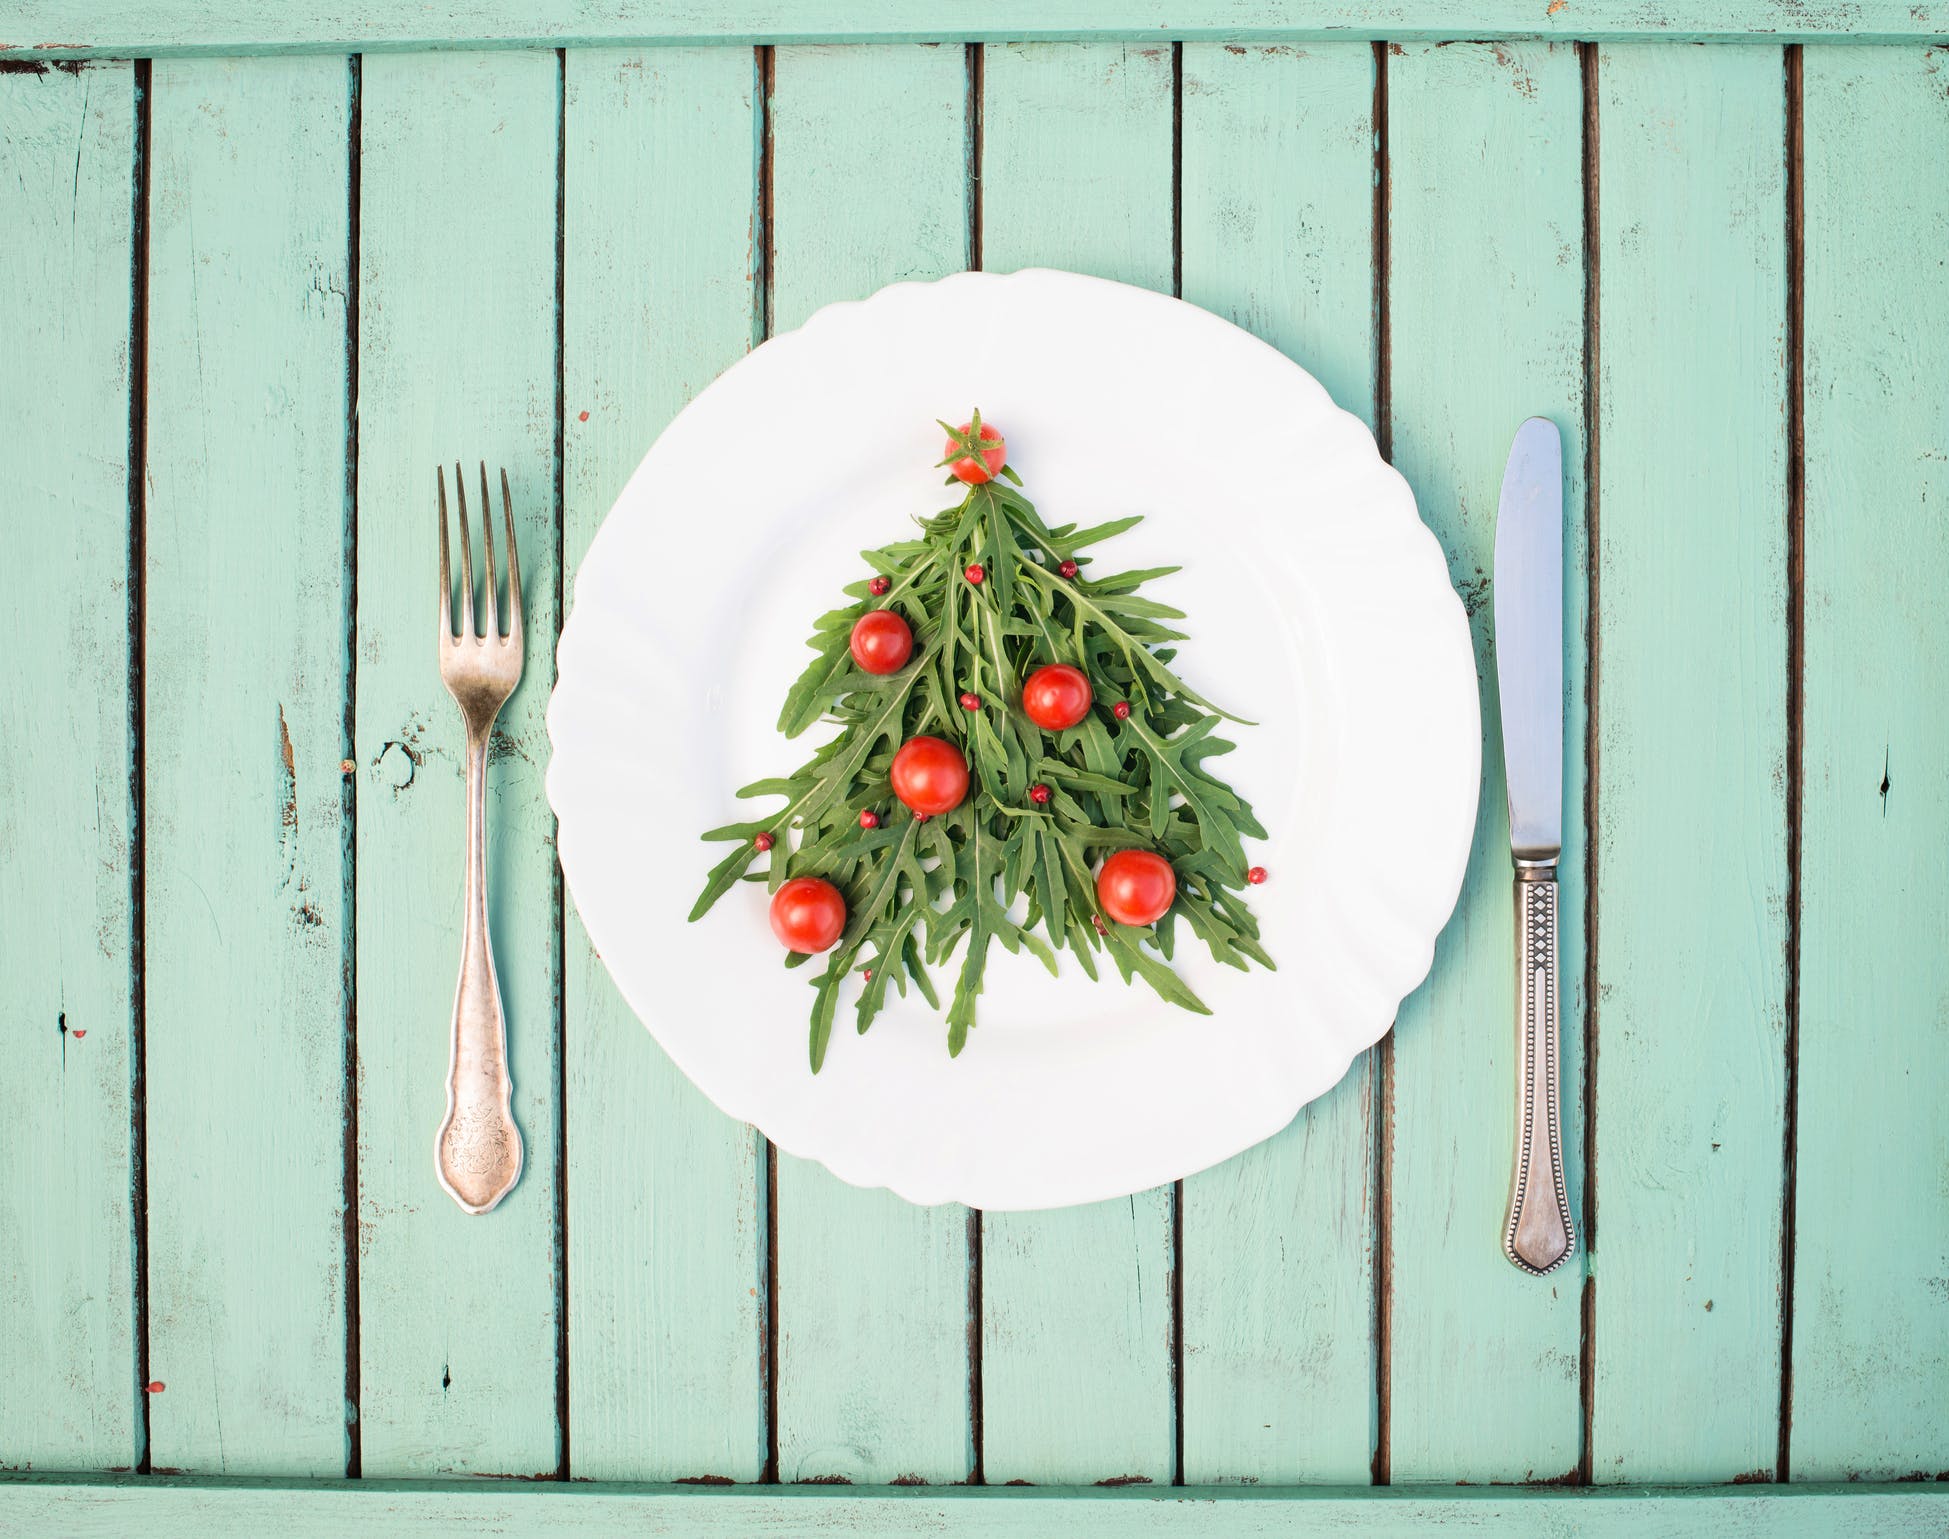 Super Festive Superfoods for the Holidays